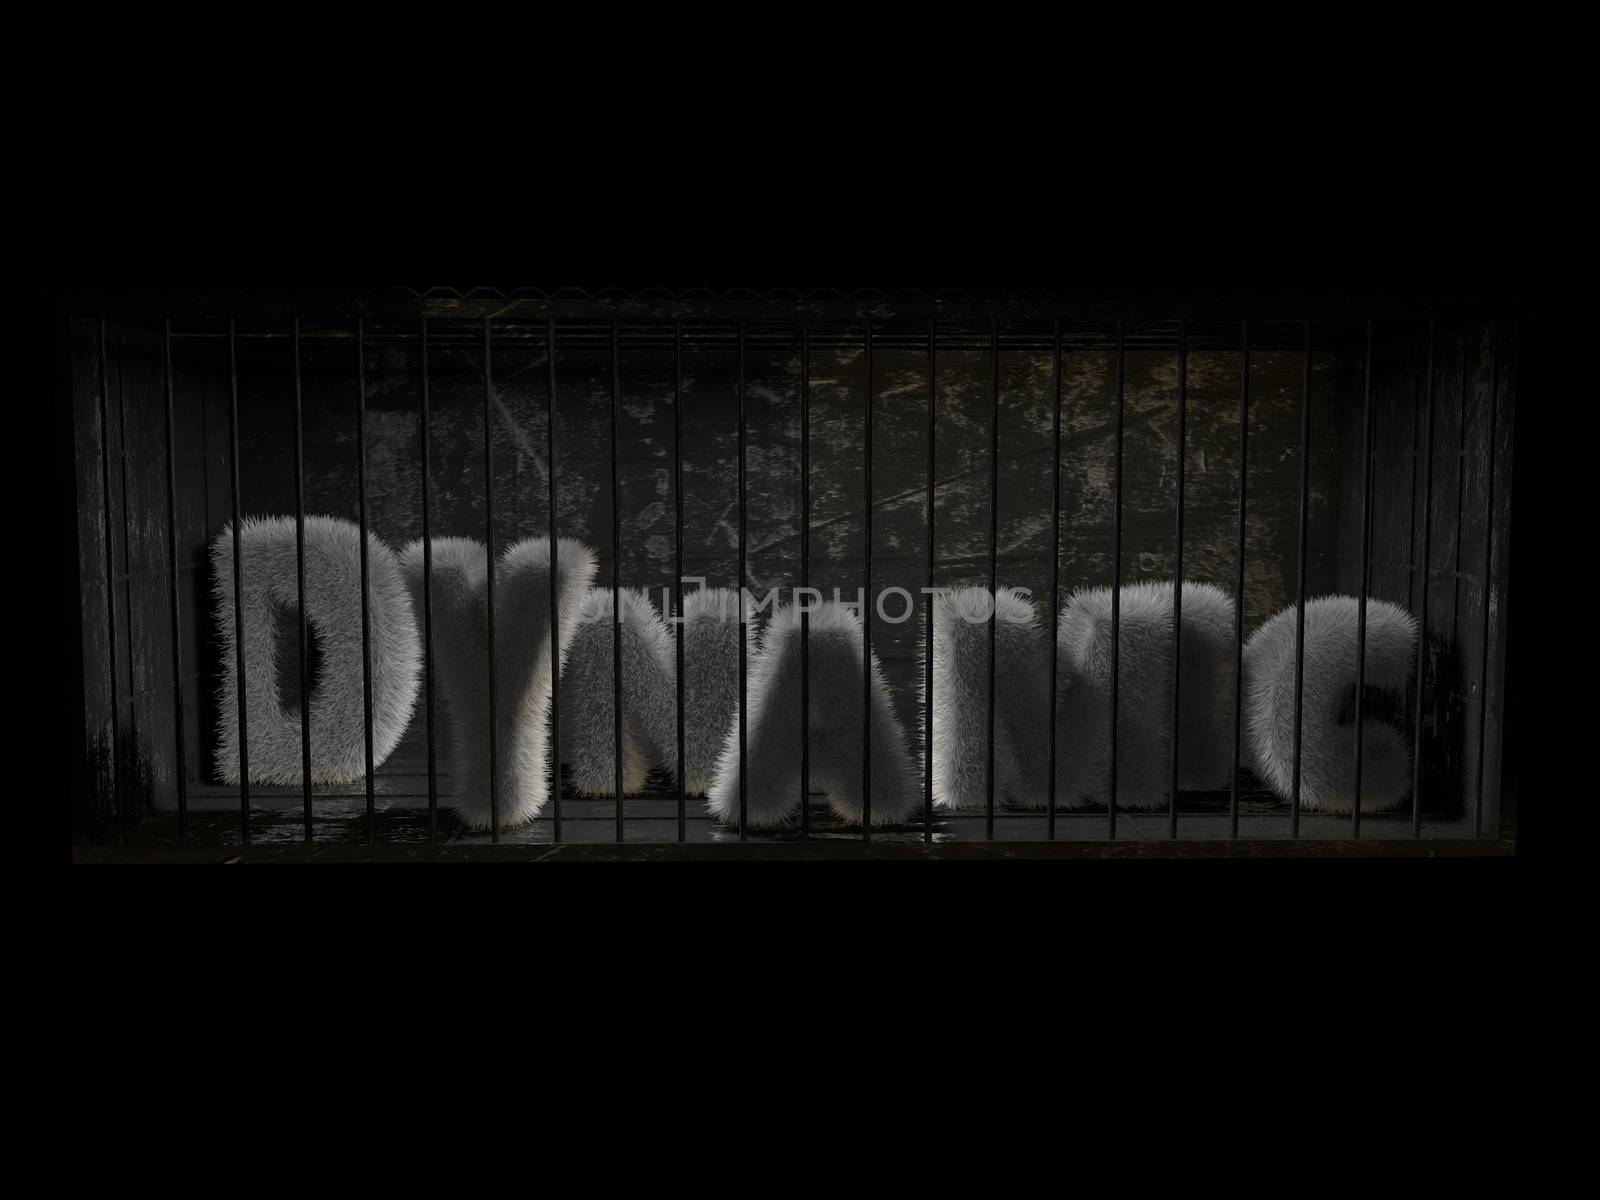 3D dynamic word inside a prison by fares139